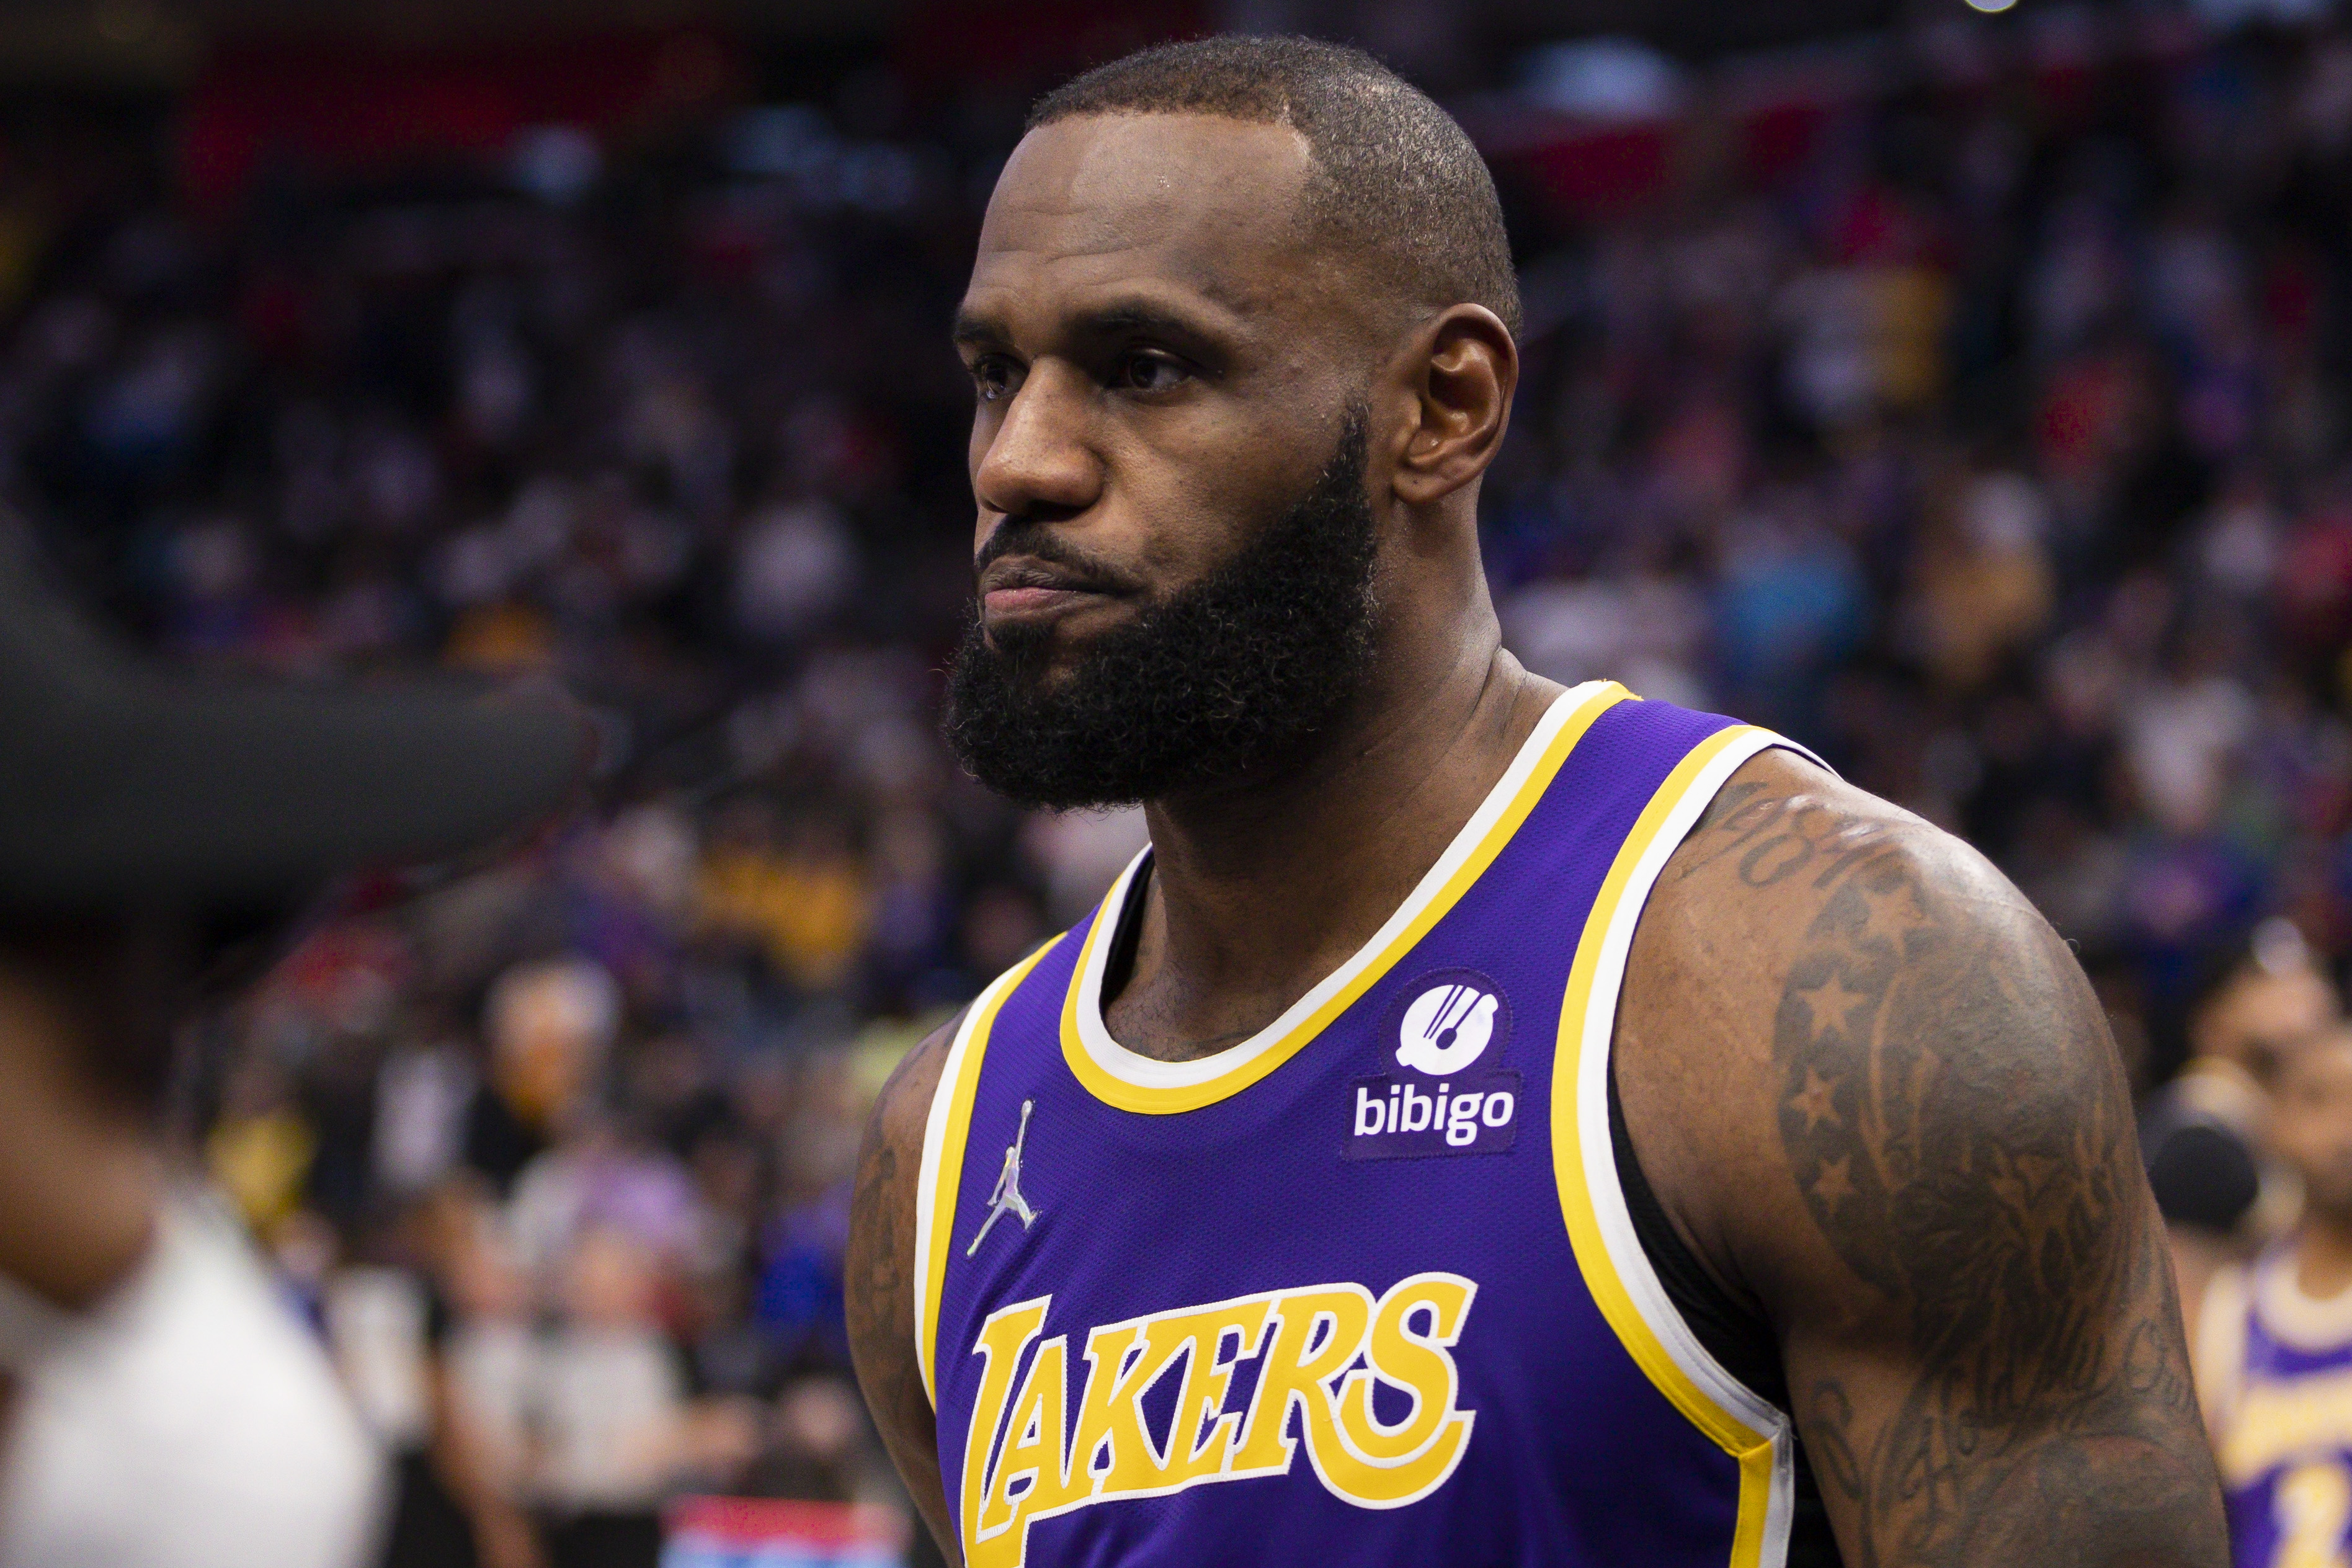 LeBron James Scores 39, Rallies Lakers Past Pacers 124-116 After